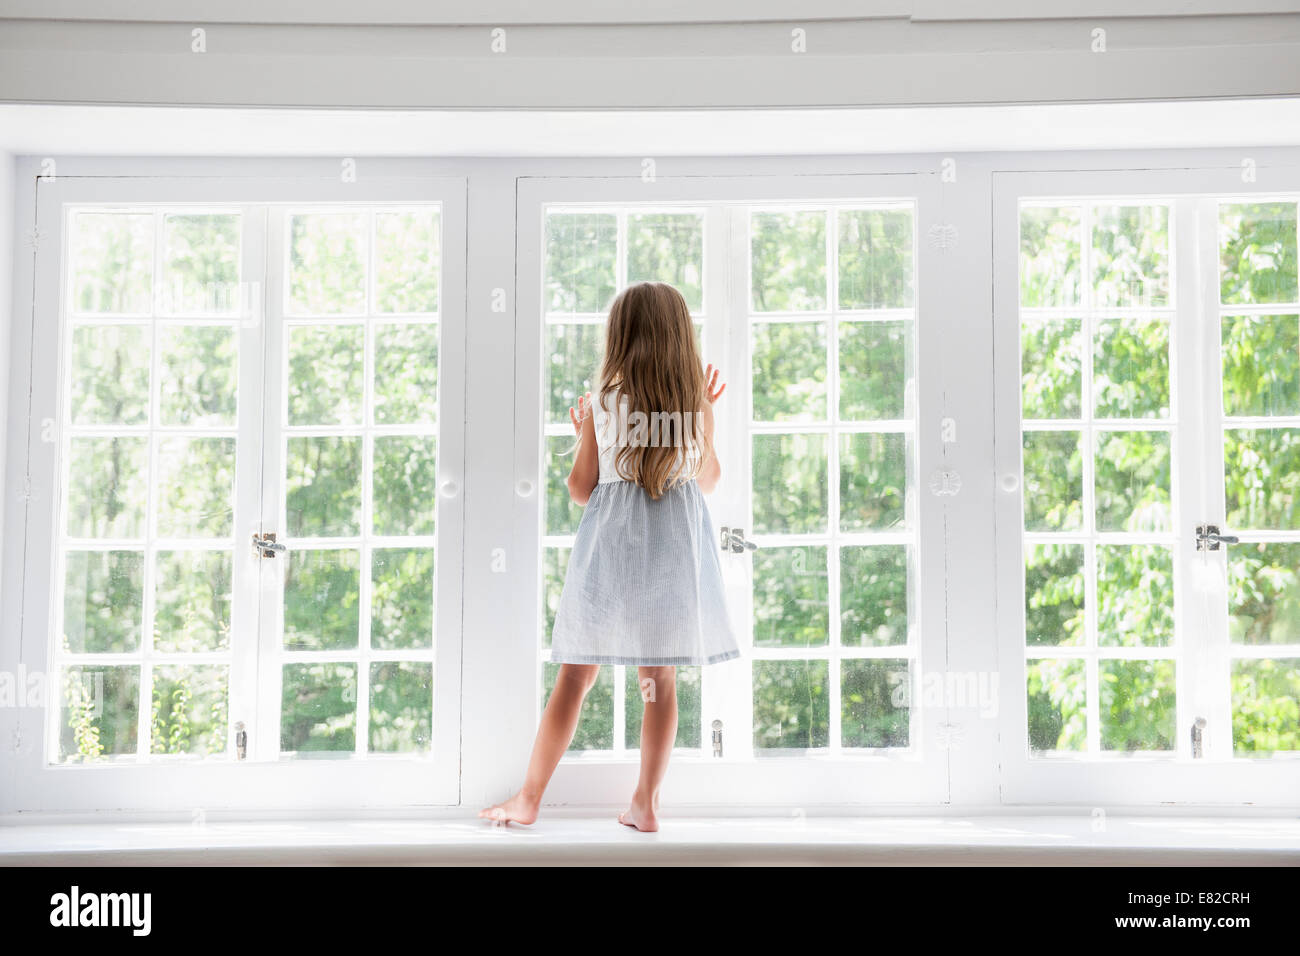 A child standing at a window looking out. Stock Photo